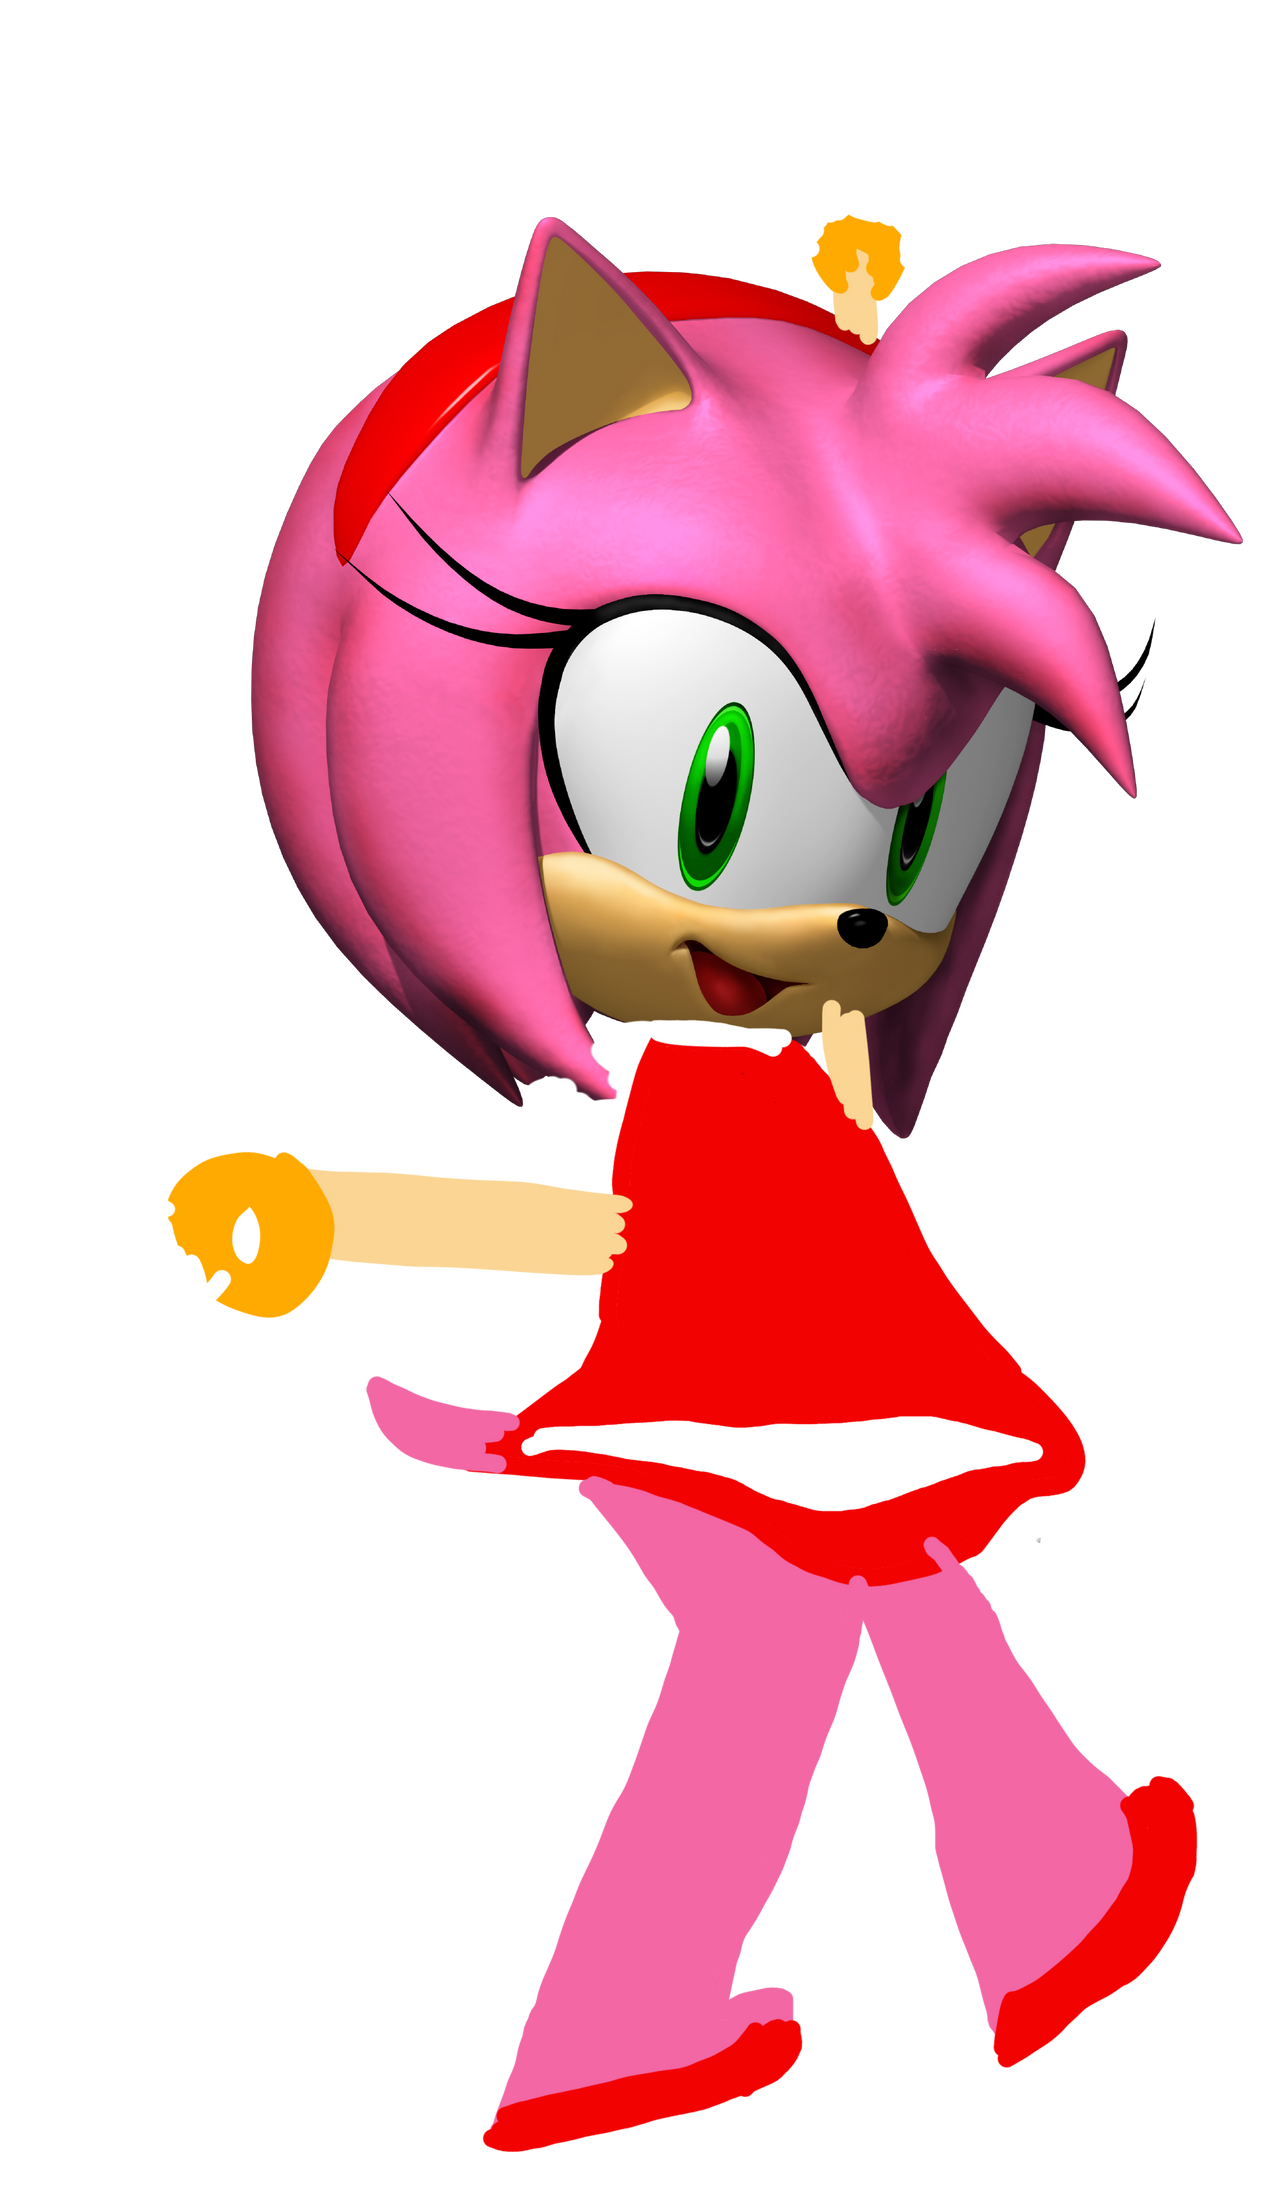 Sonic Heroes Amy Rose Gymnastics by gavinthesonic18 on DeviantArt